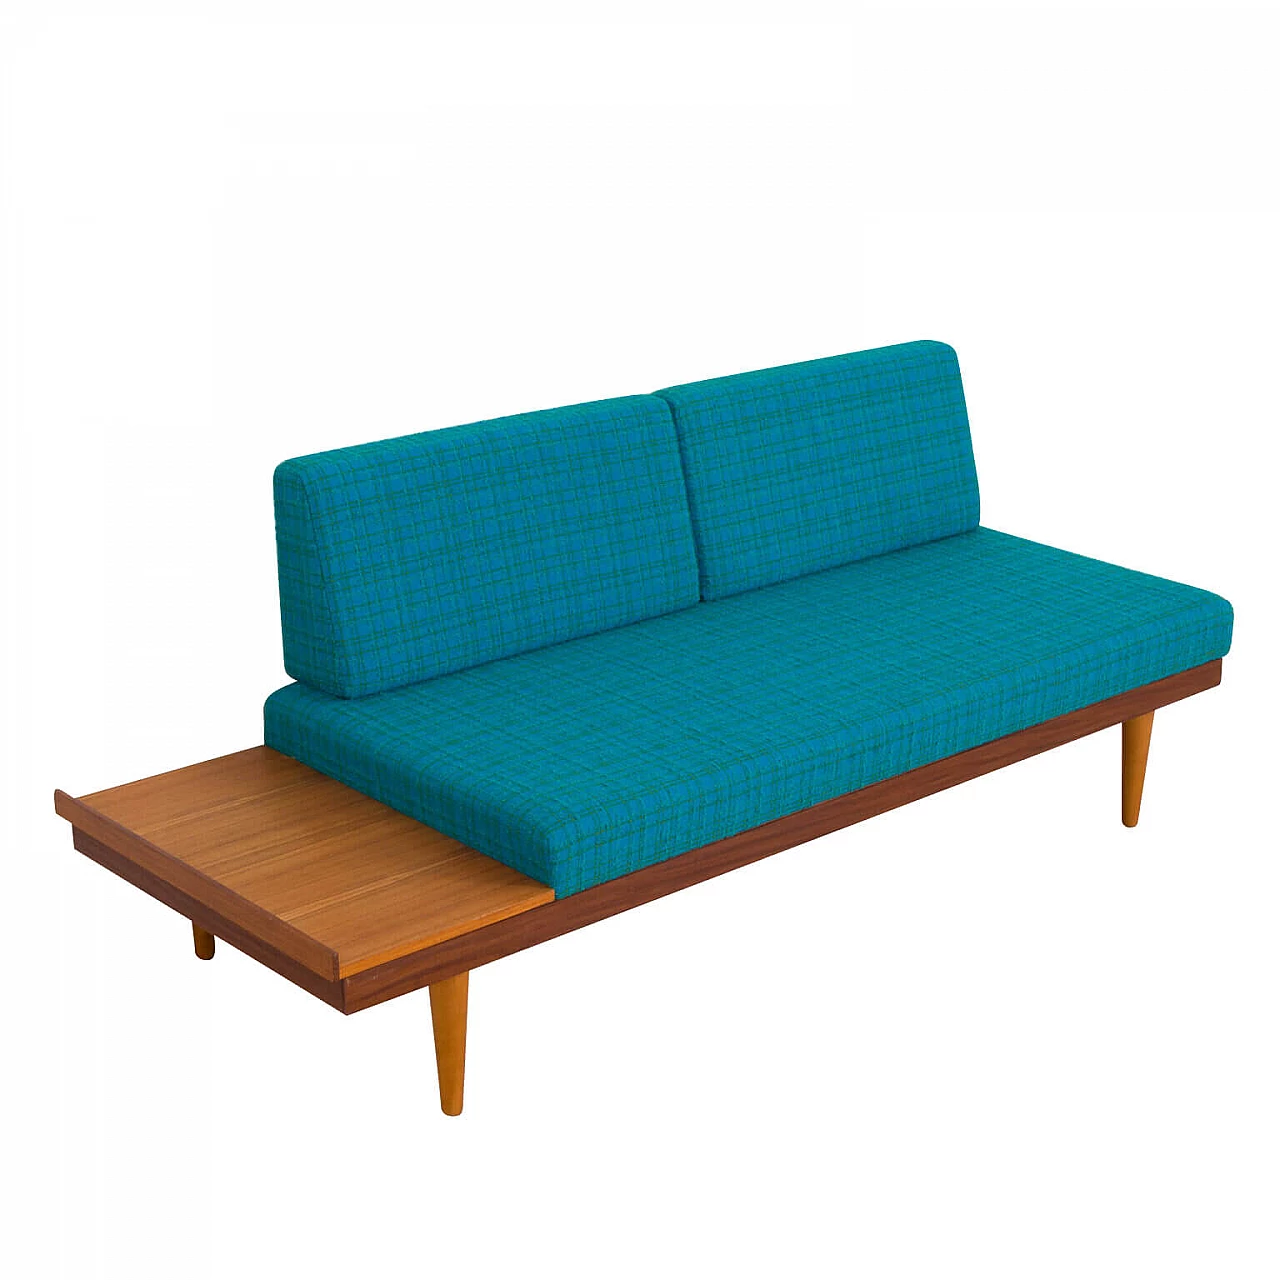 Svanette daybed with side table in fabric and teak by Ingmar Relling for Swane Ekornes, 1960s 1269500